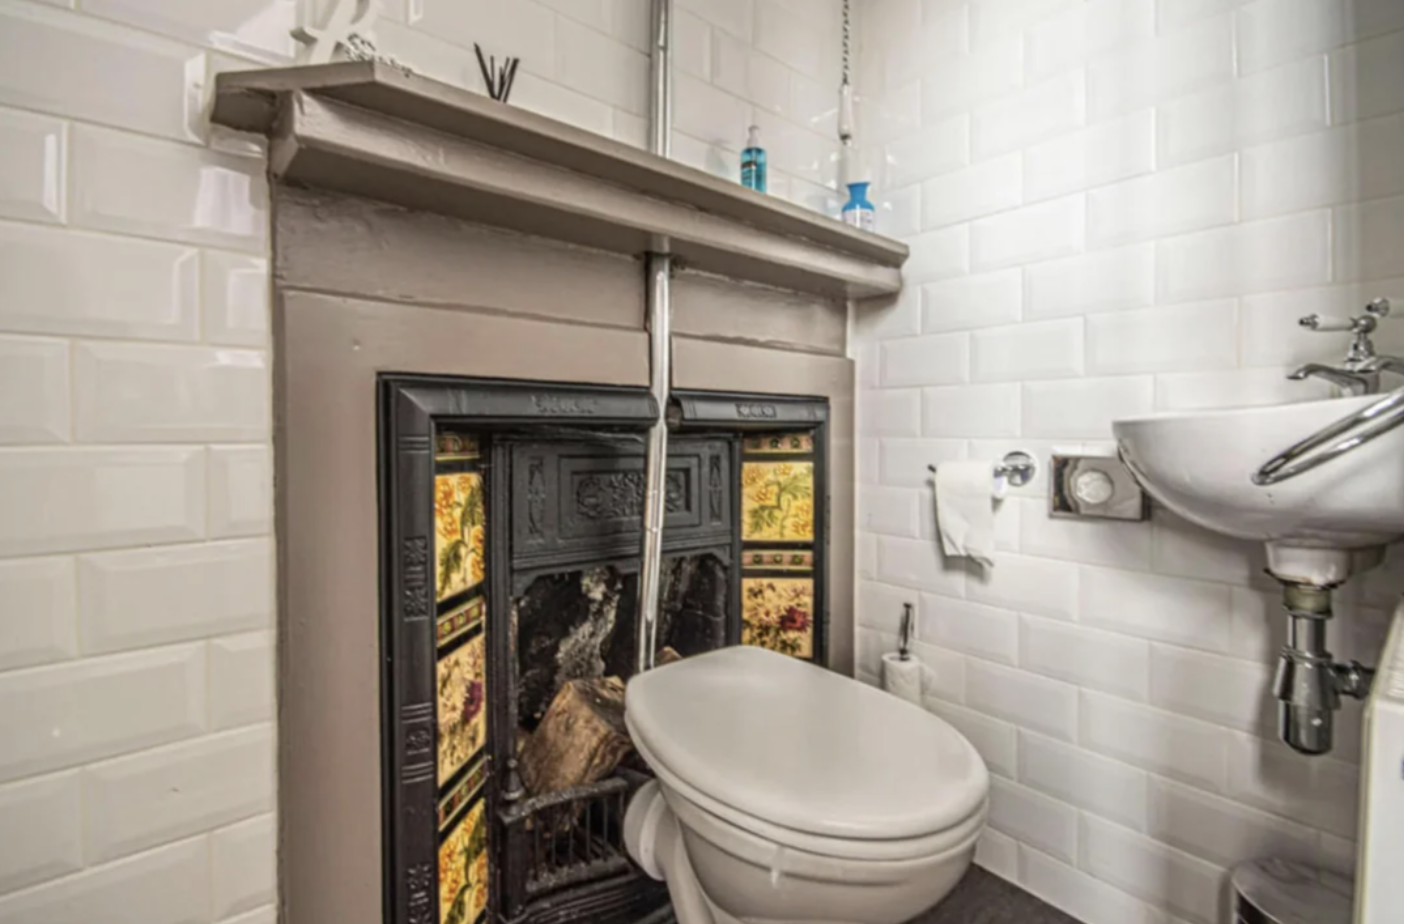 A bathroom with a decorative fireplace behind a toilet and wall-mounted sink